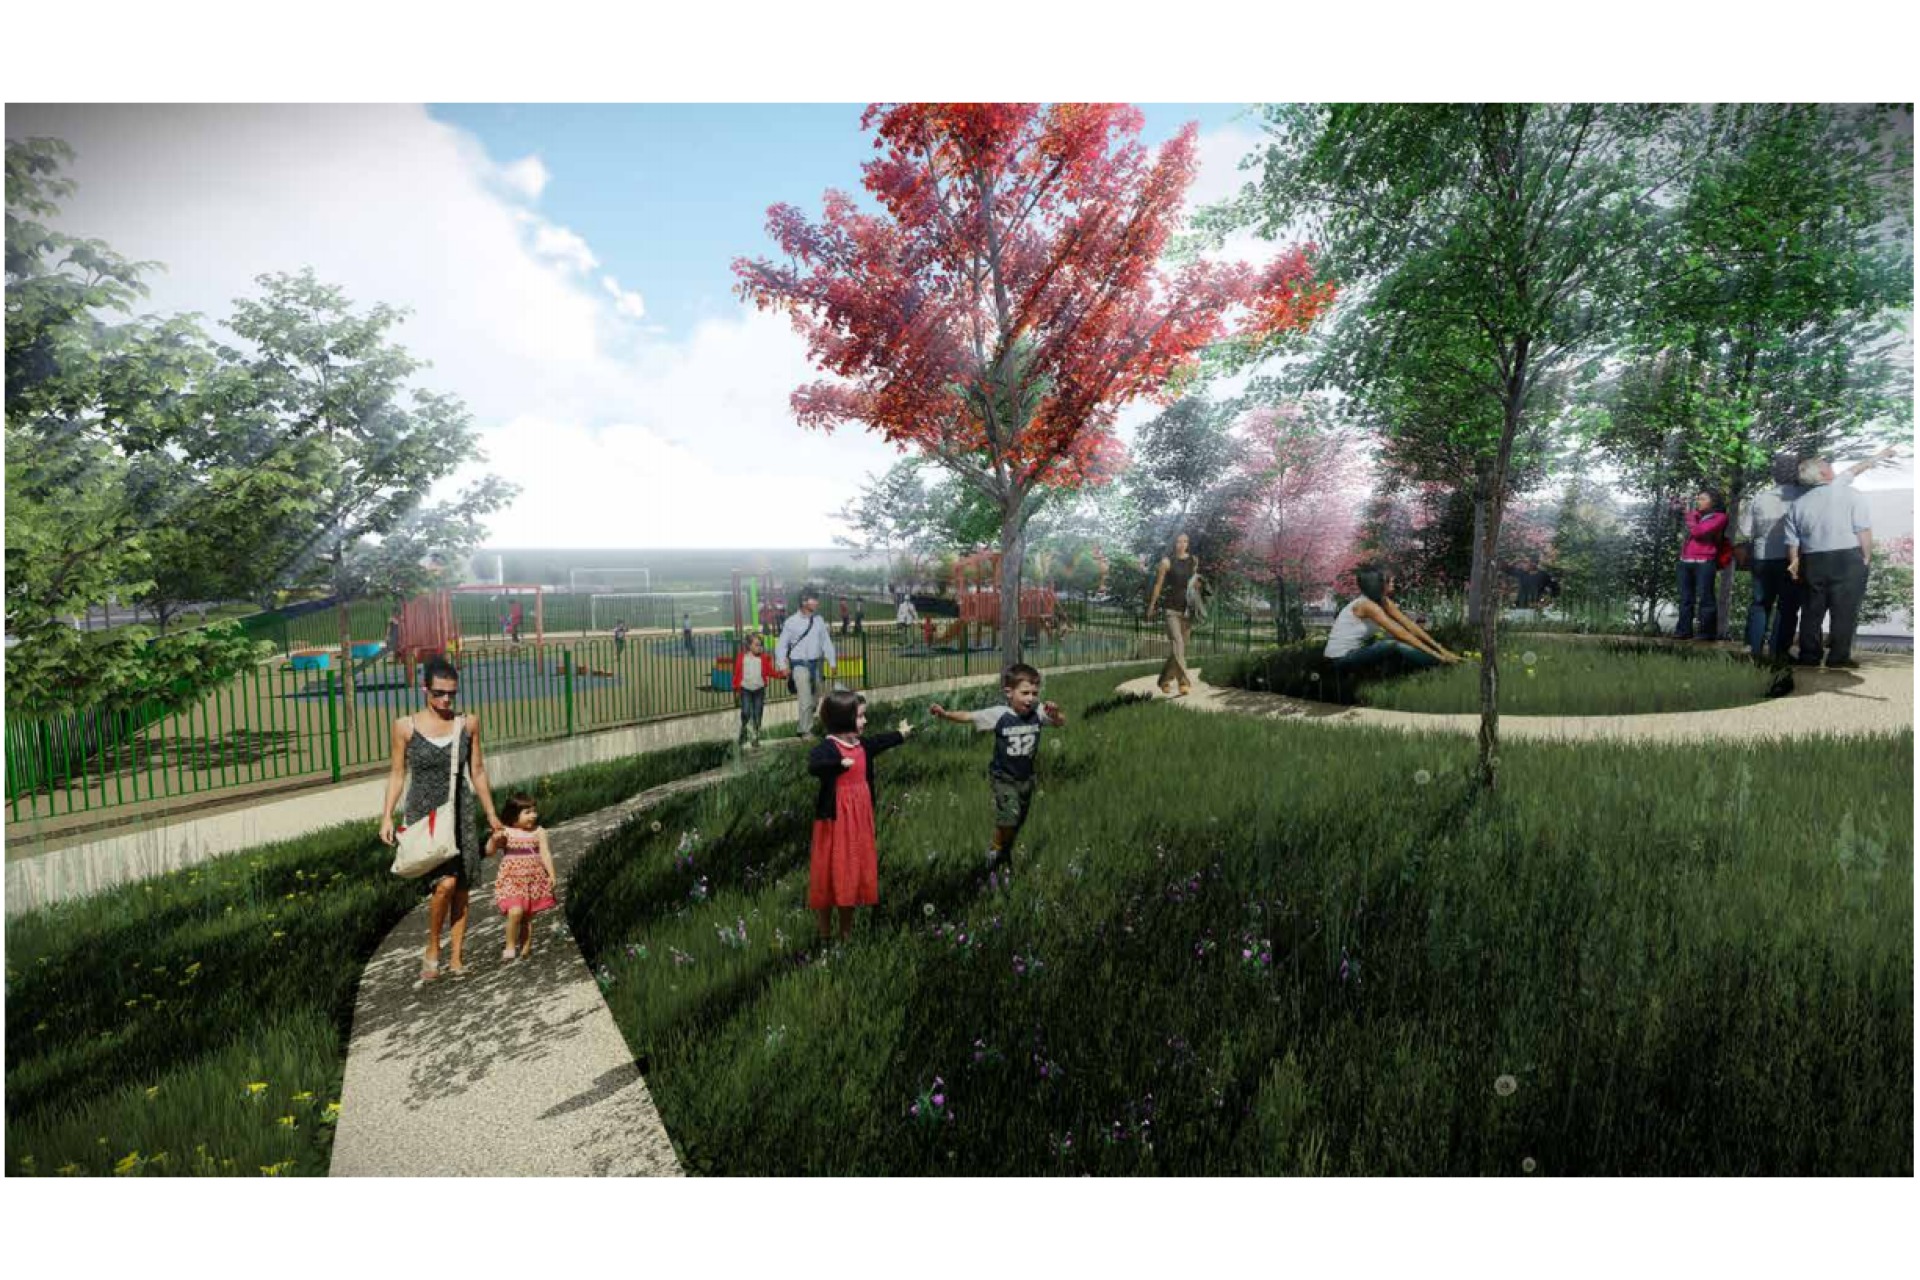 View of the Play Park Proposals Looking East by LUC